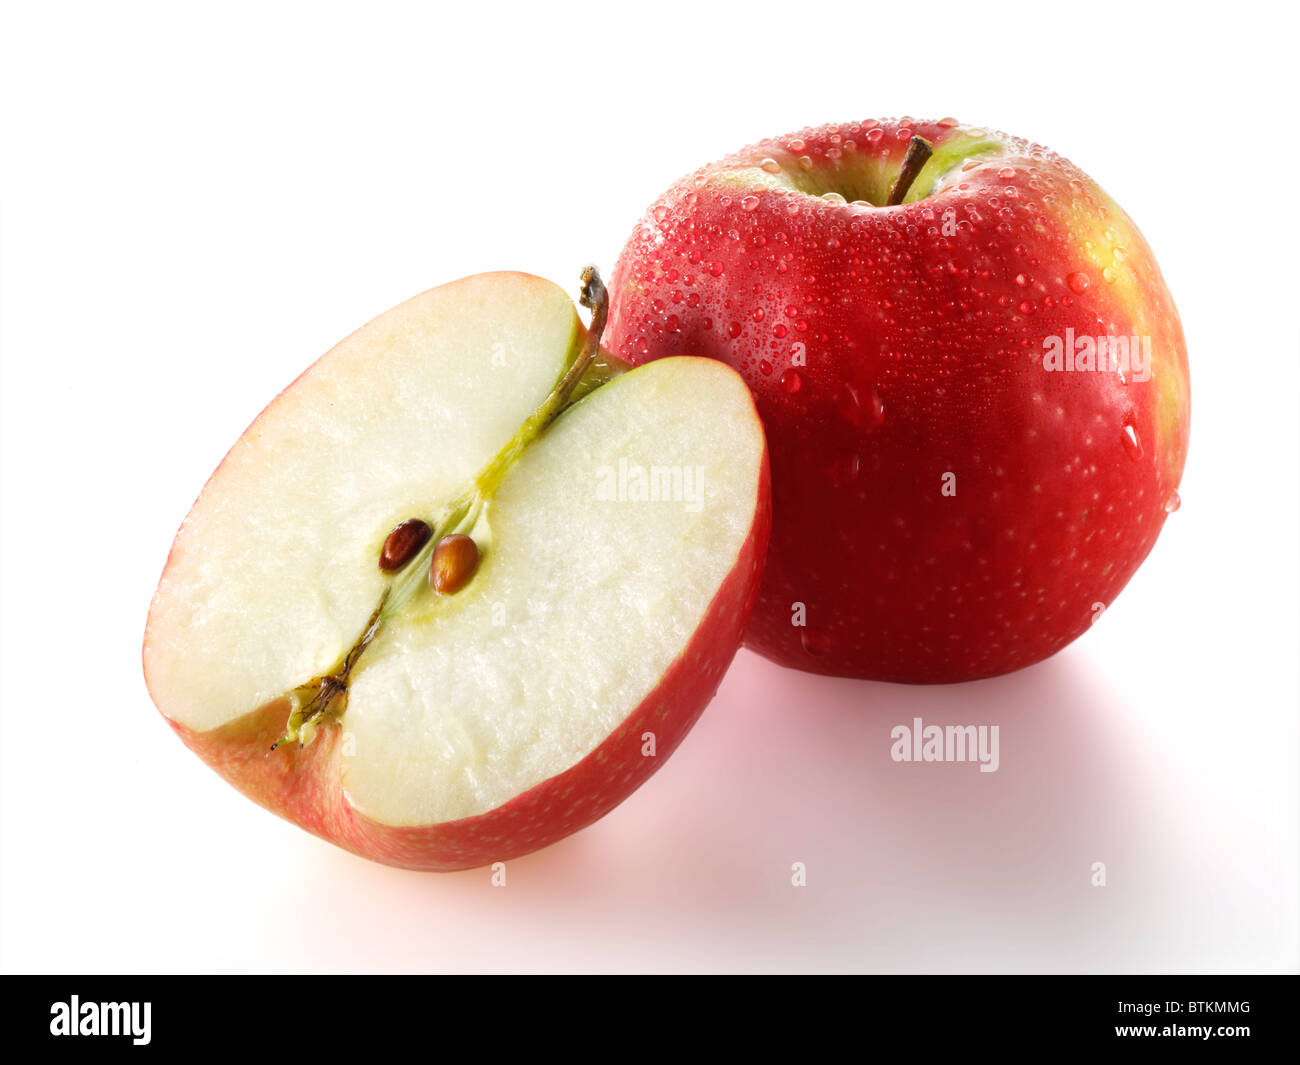 Fresh whole and sliced red Discovery apple Stock Photo